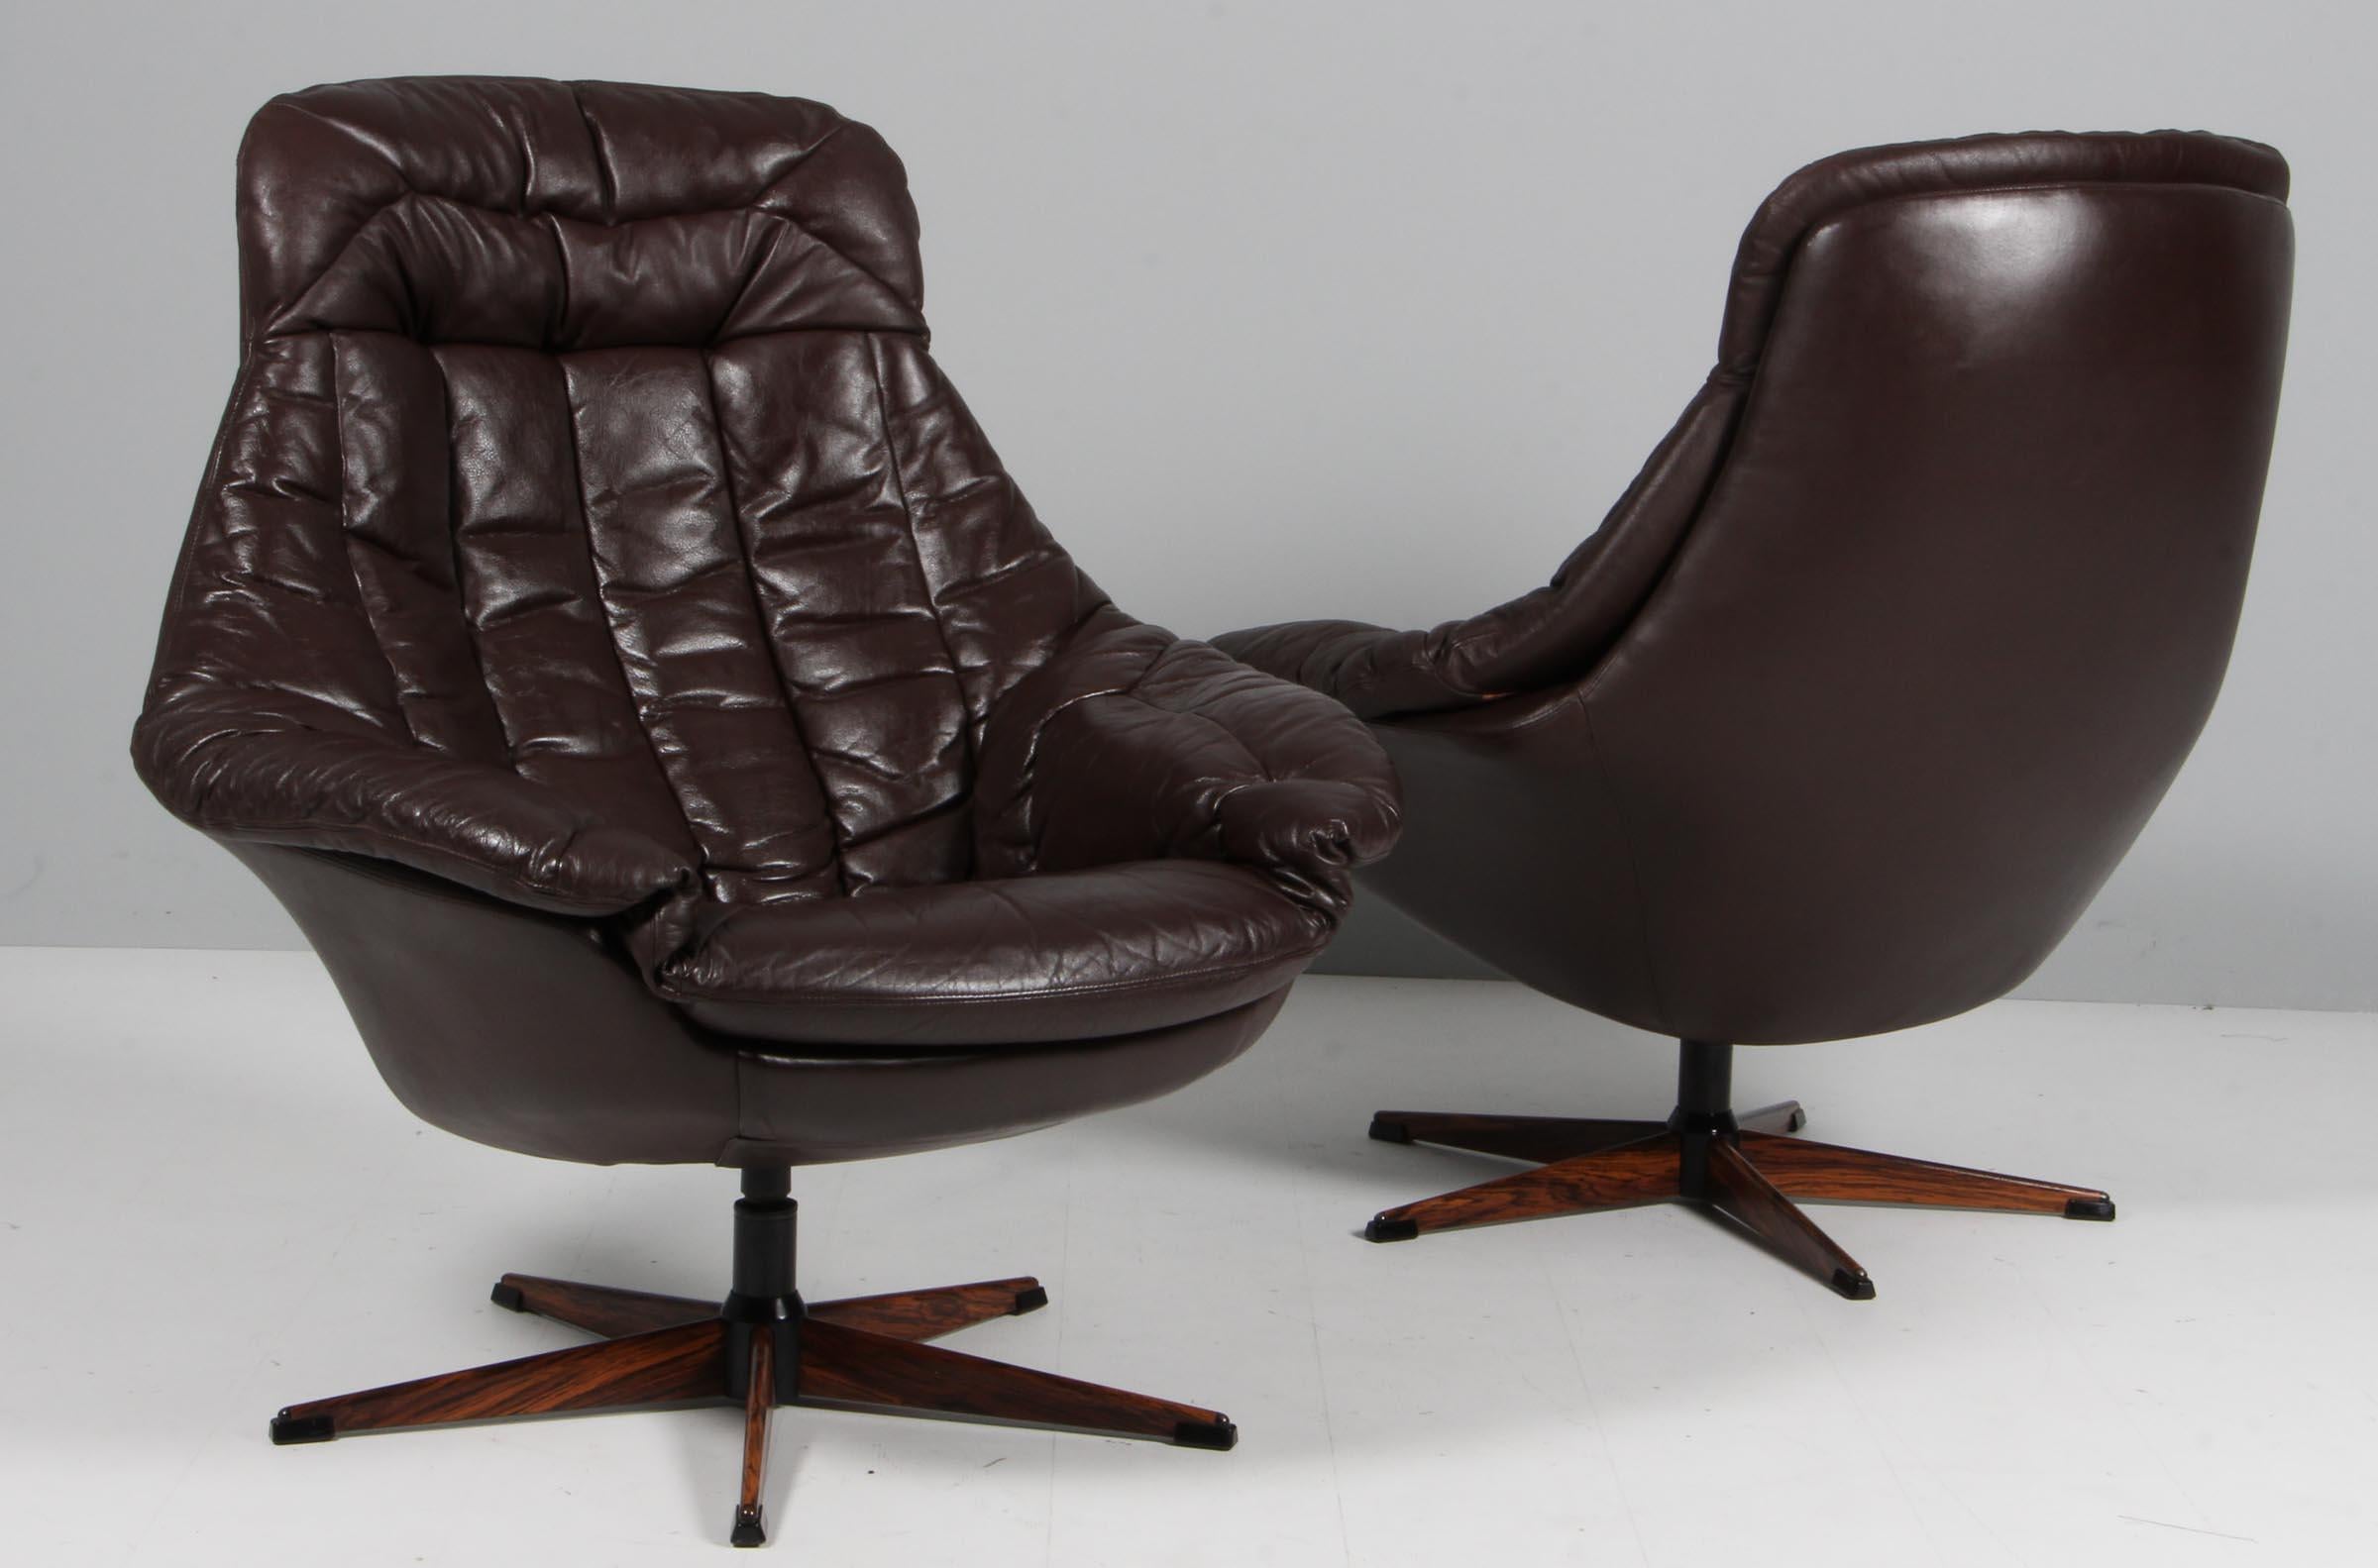 H. W. Klein lounge chair in brown leather.

Swivel base with rosewood look.

Model Silhouette, made by Bramin